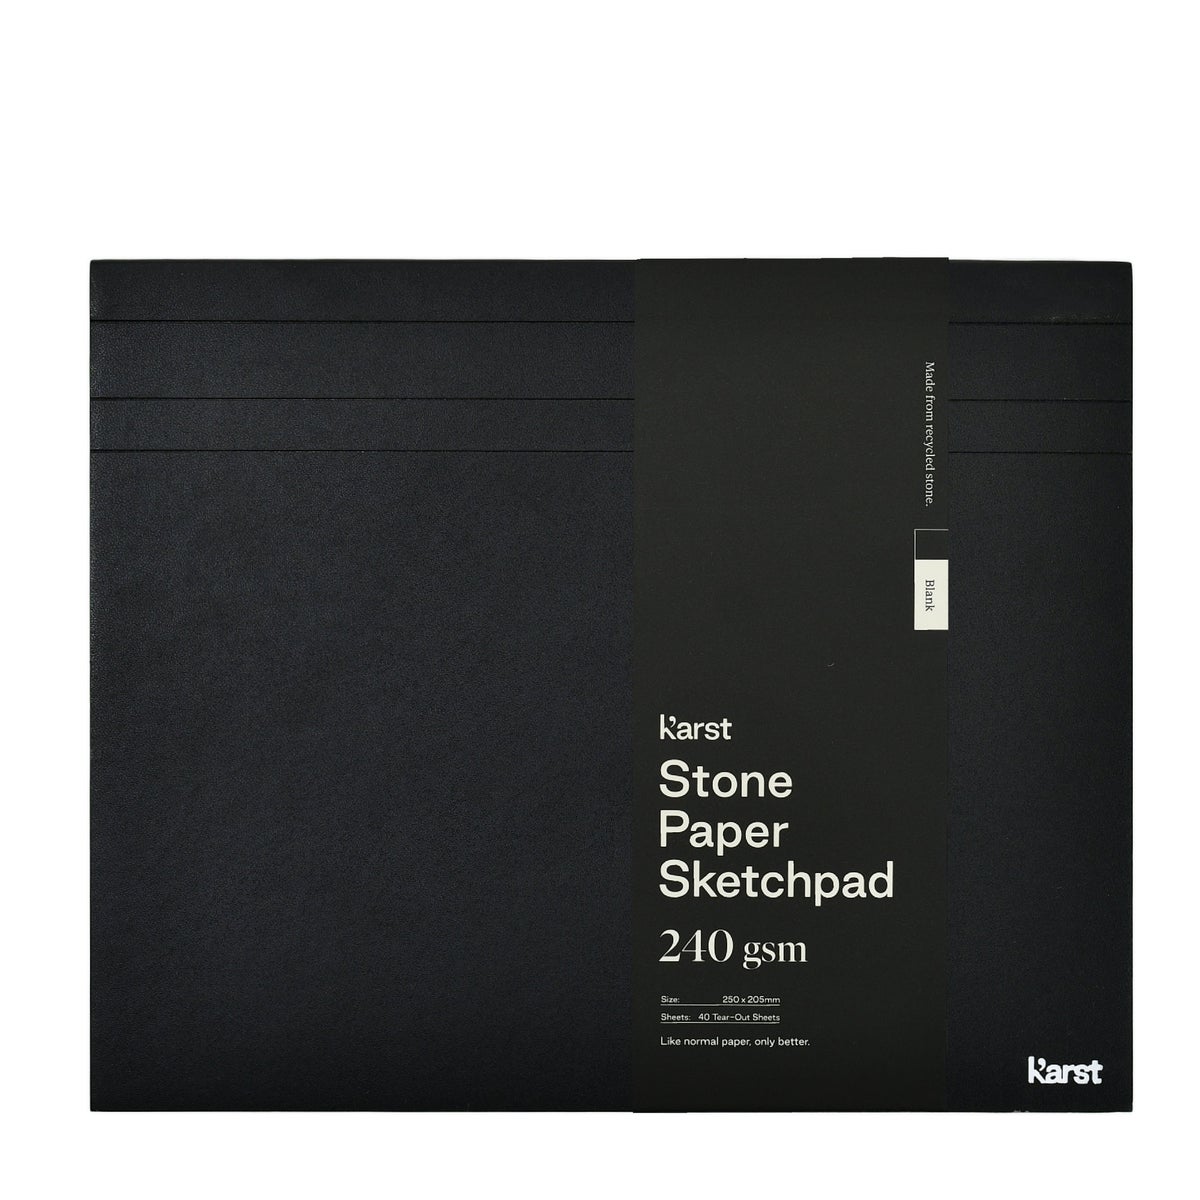 Karst A5 Hardcover Notebook - Stone Lined